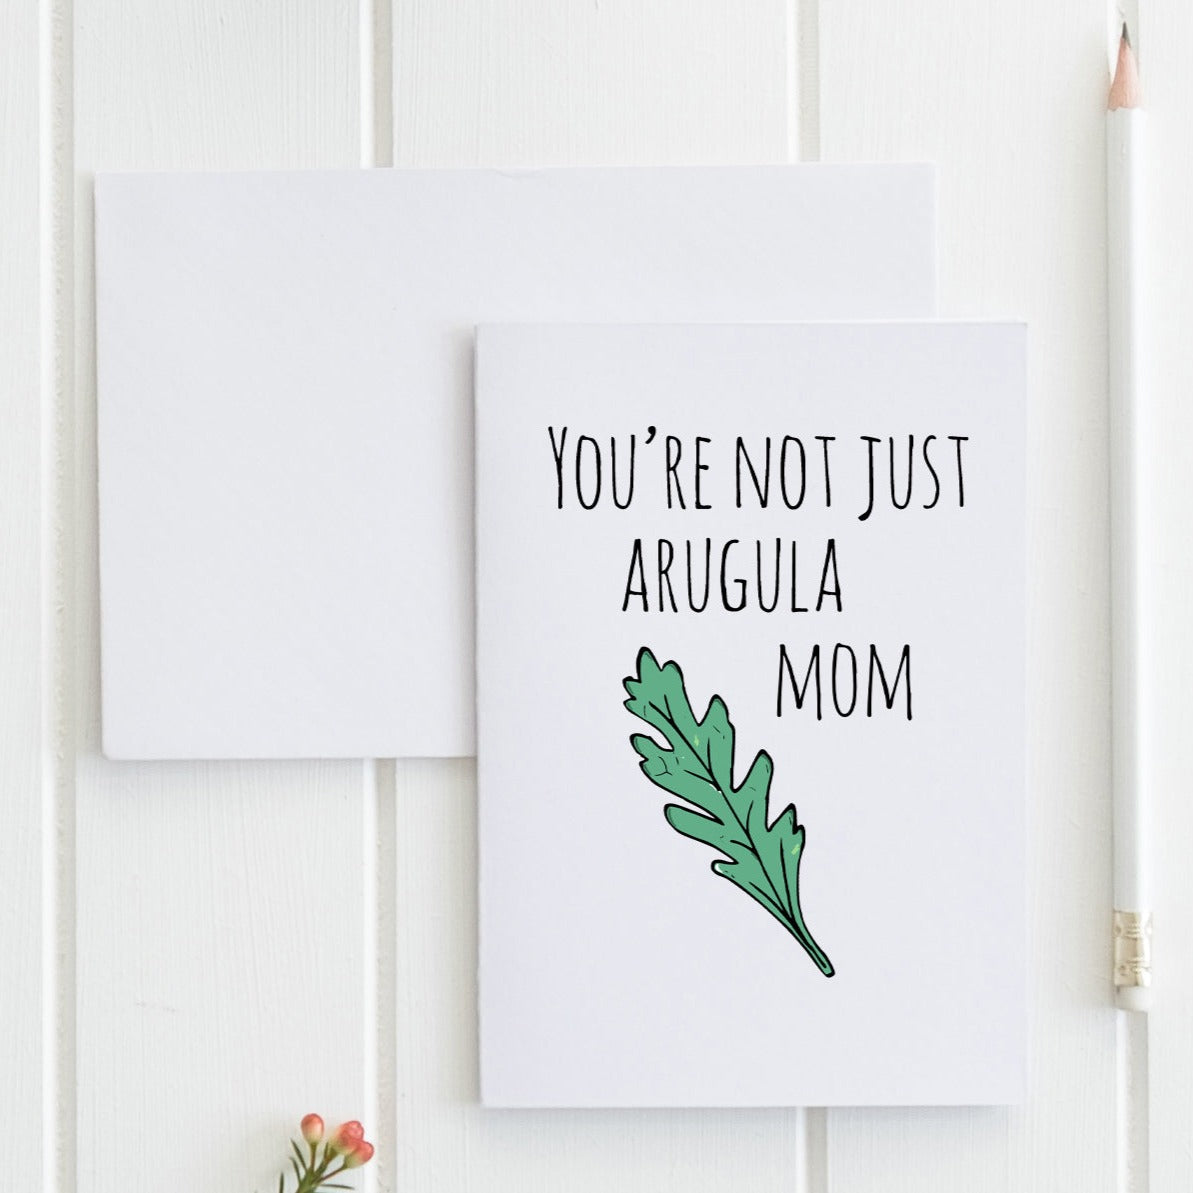 SALE - You're Not Just Arugula Mom - Greeting Card